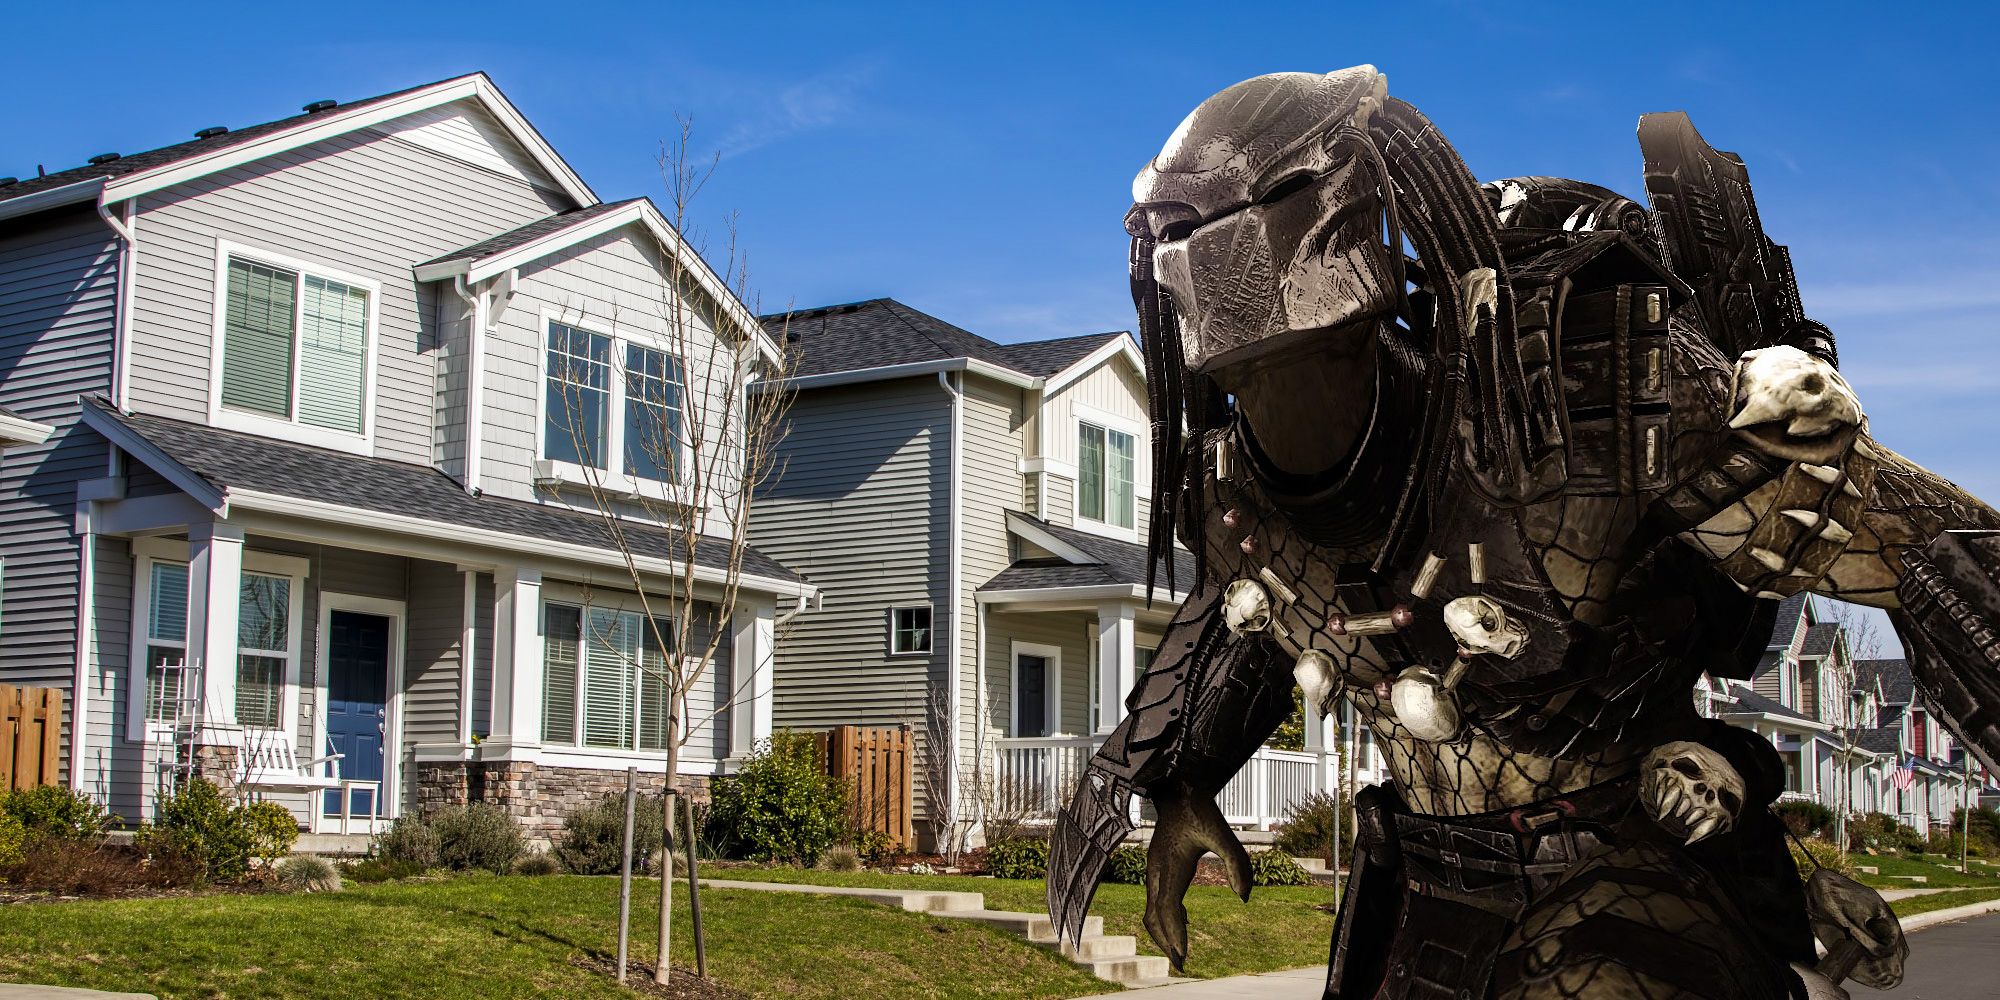 The Predator not in the suburbs